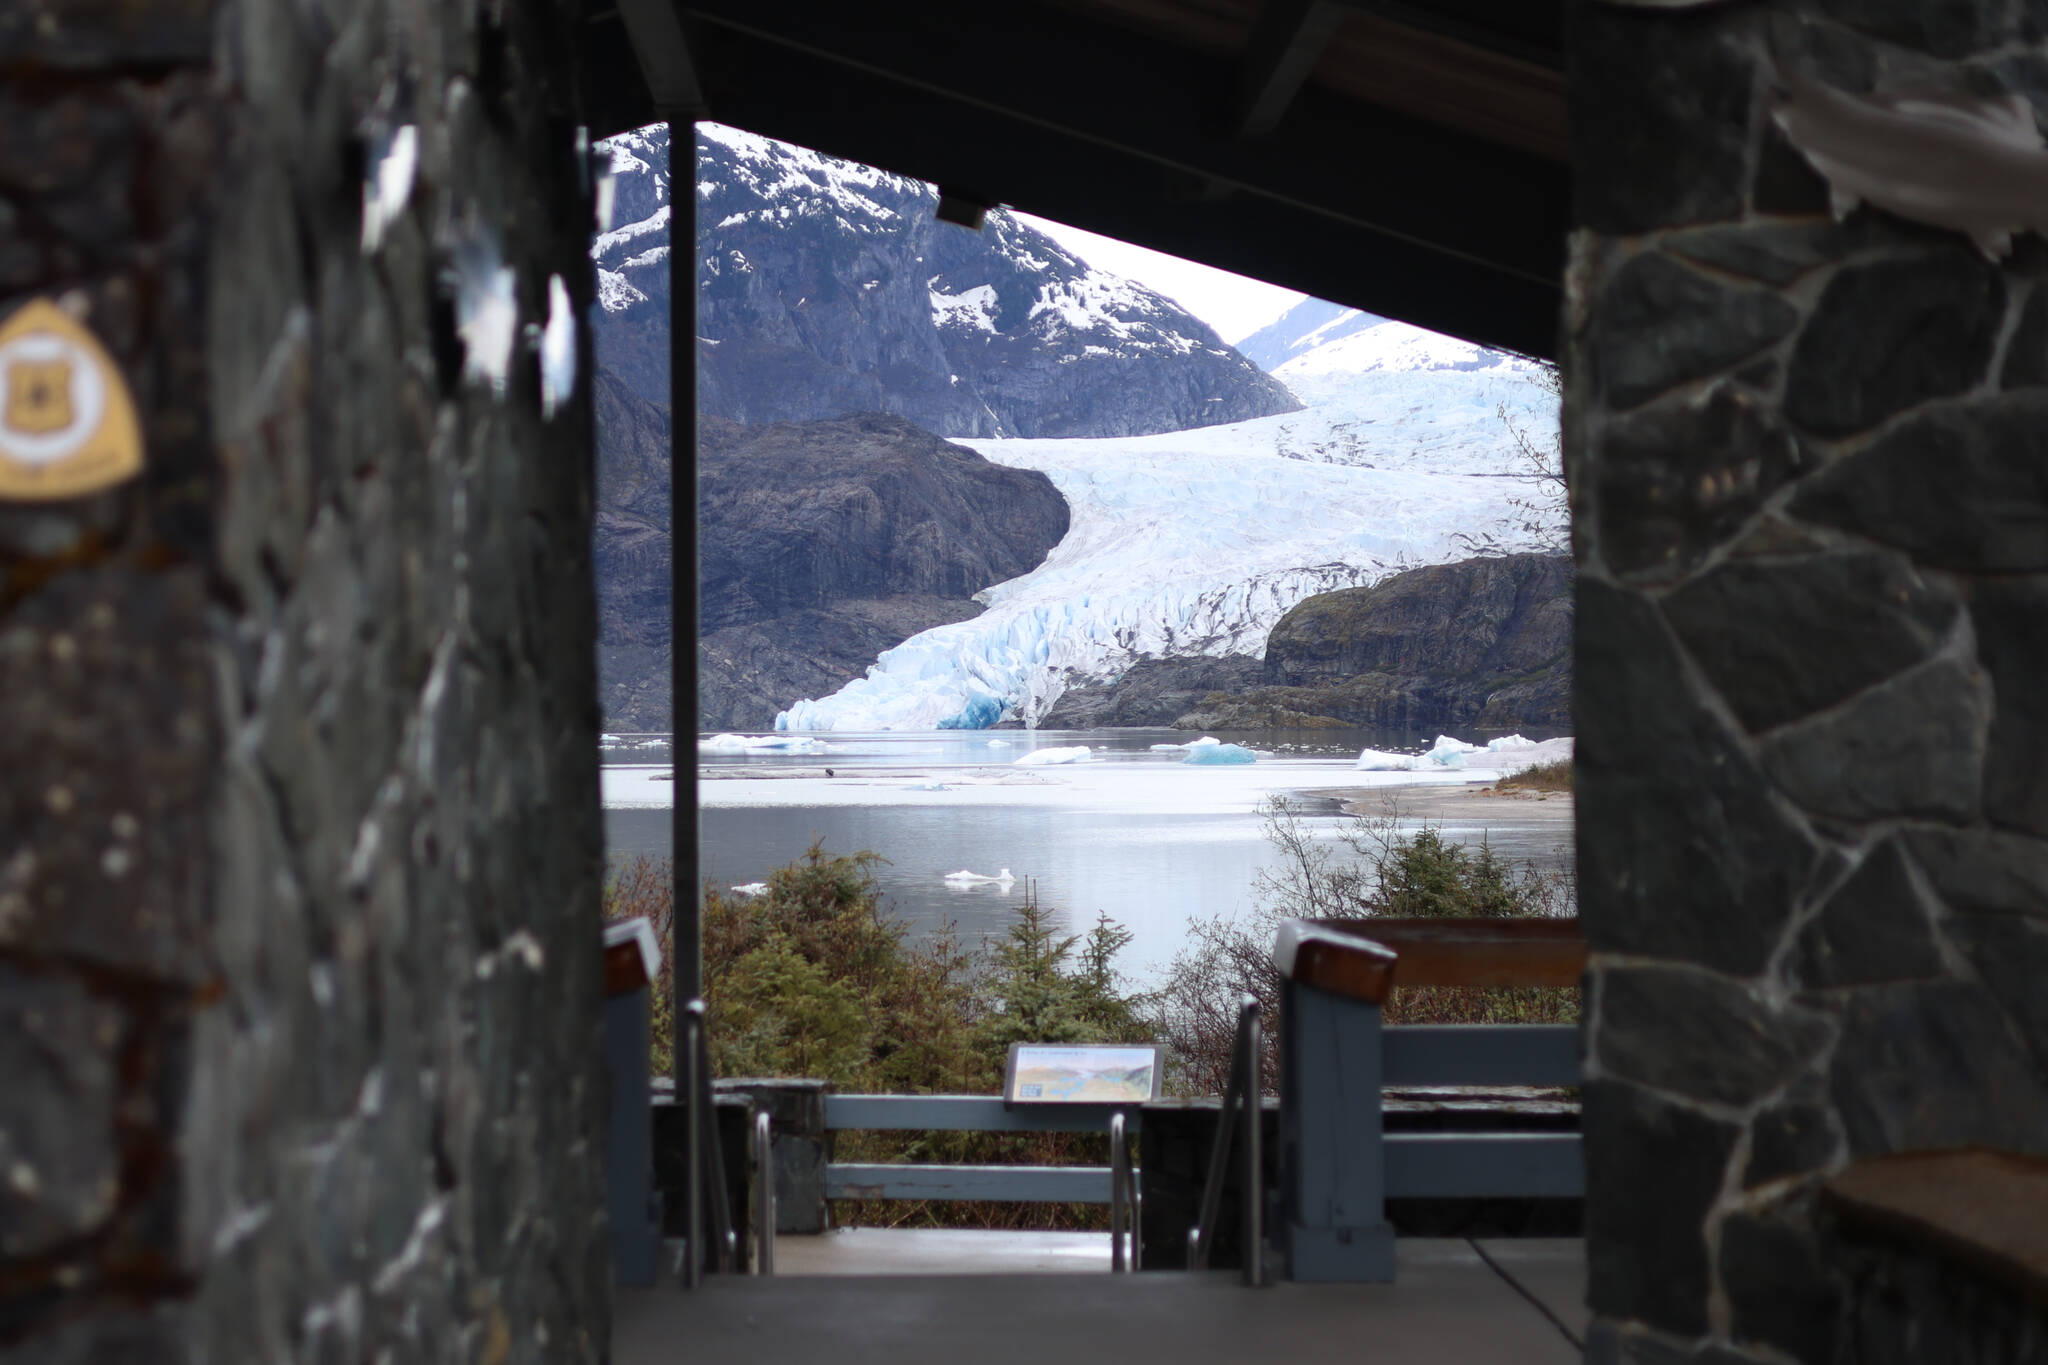 The Mendenhall Glacier is seen through the entrance of a pavilion near the Mendenhall Glacier Visitor Center on Friday. The area surrounding the visitor center will see significant changes under a plan to overhaul the Mendenhall Glacier Recreation Area. (Ben Hohenstatt / Juneau Empire)